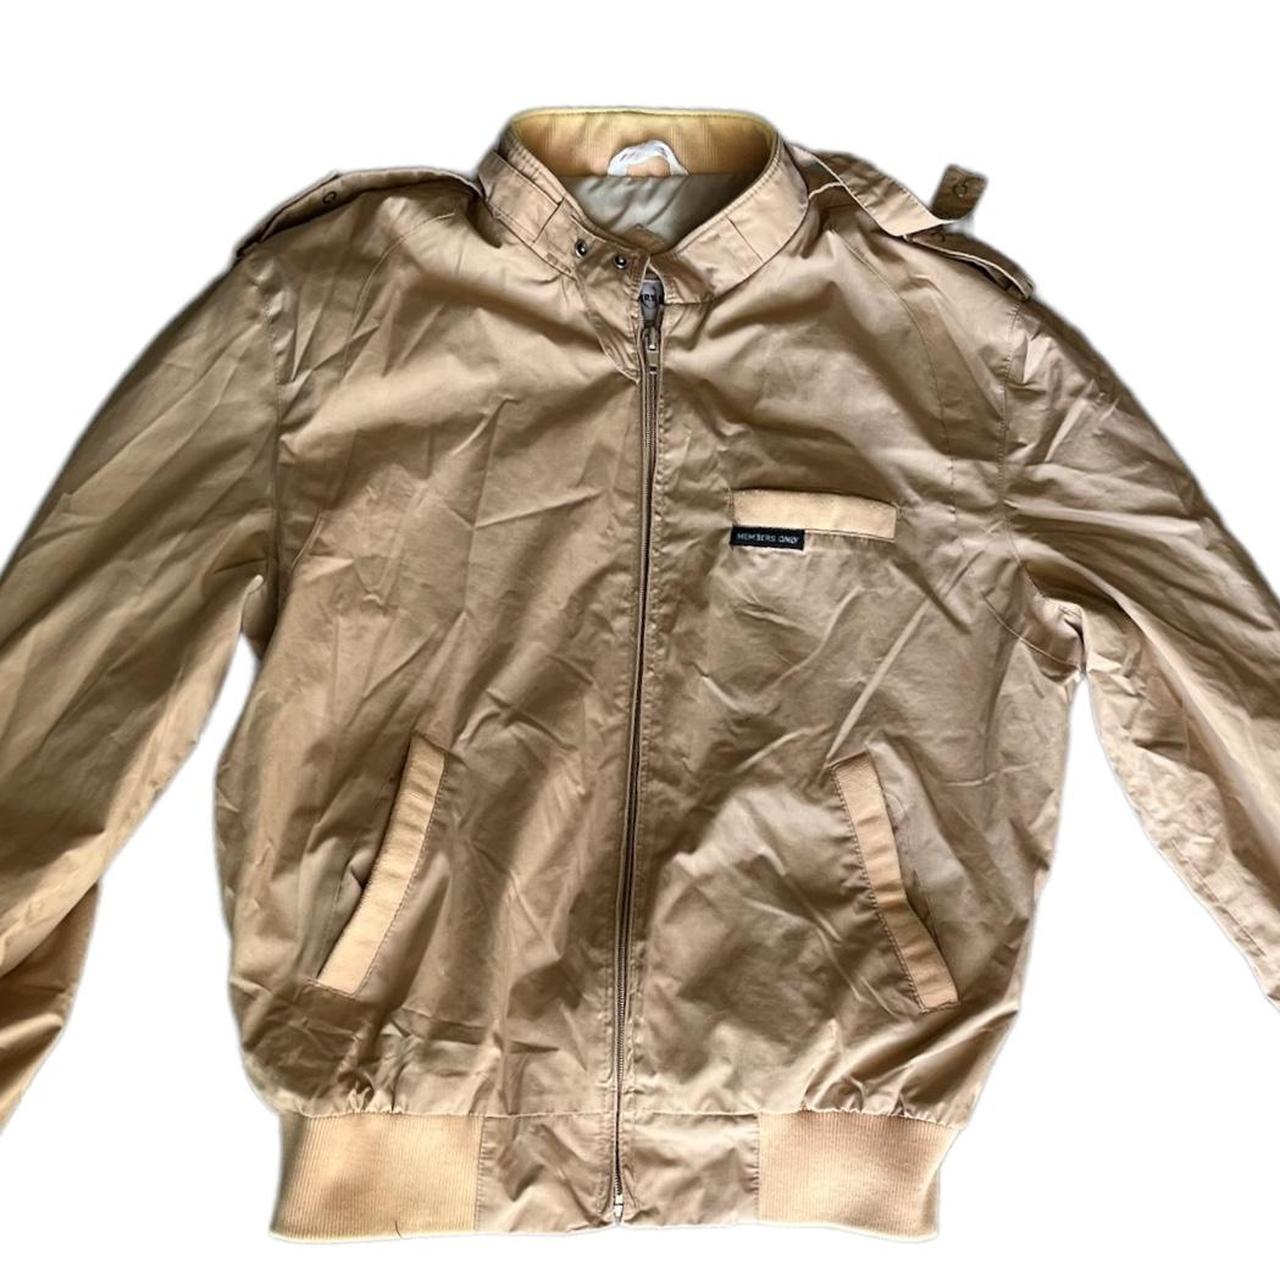 Members Only Men's Tan and Cream Jacket (2)